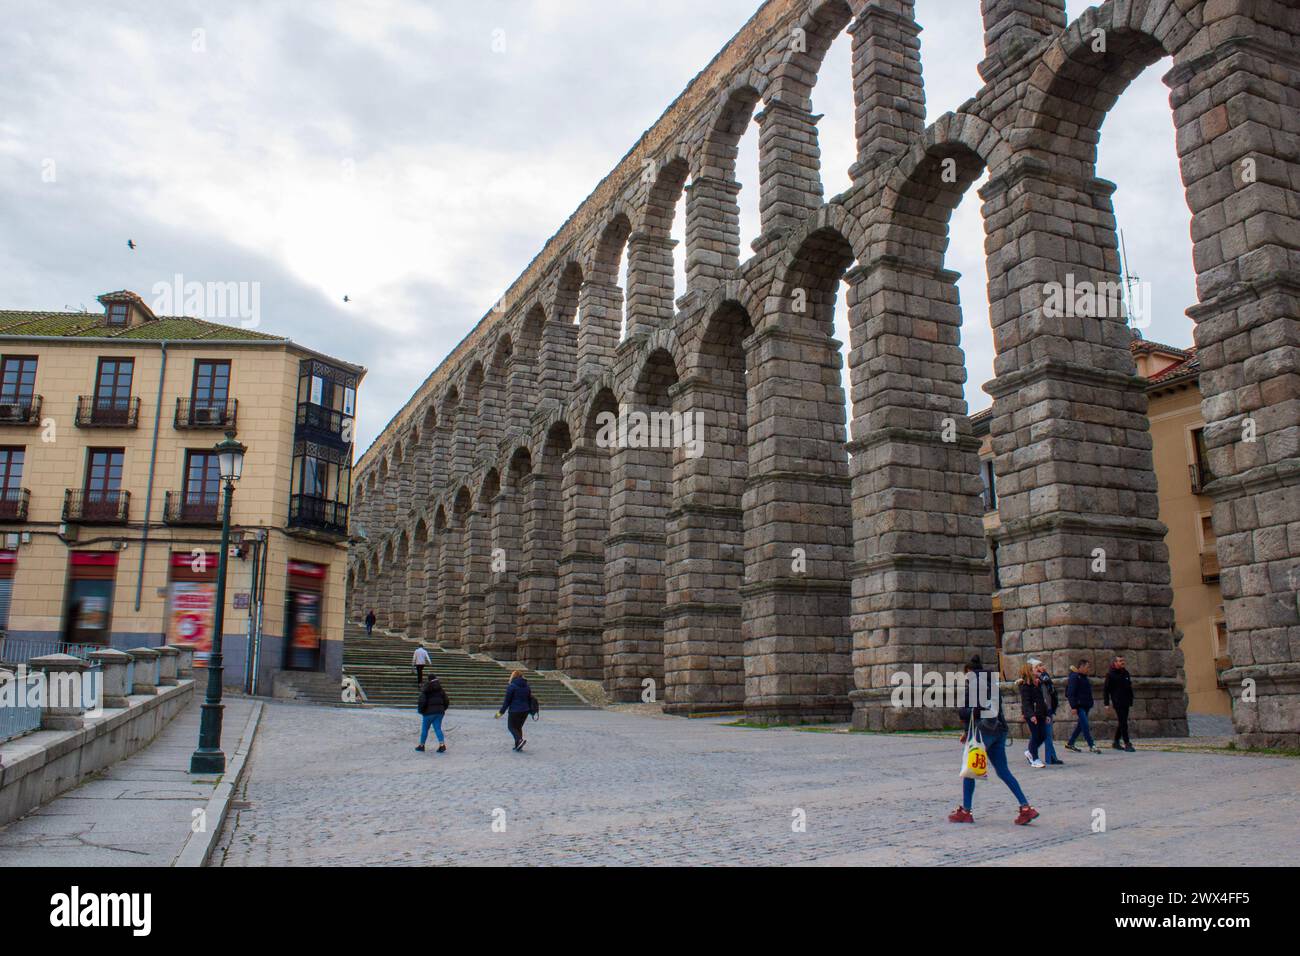 View of the Roman aceduct of Segovia from the ancient city Stock Photo